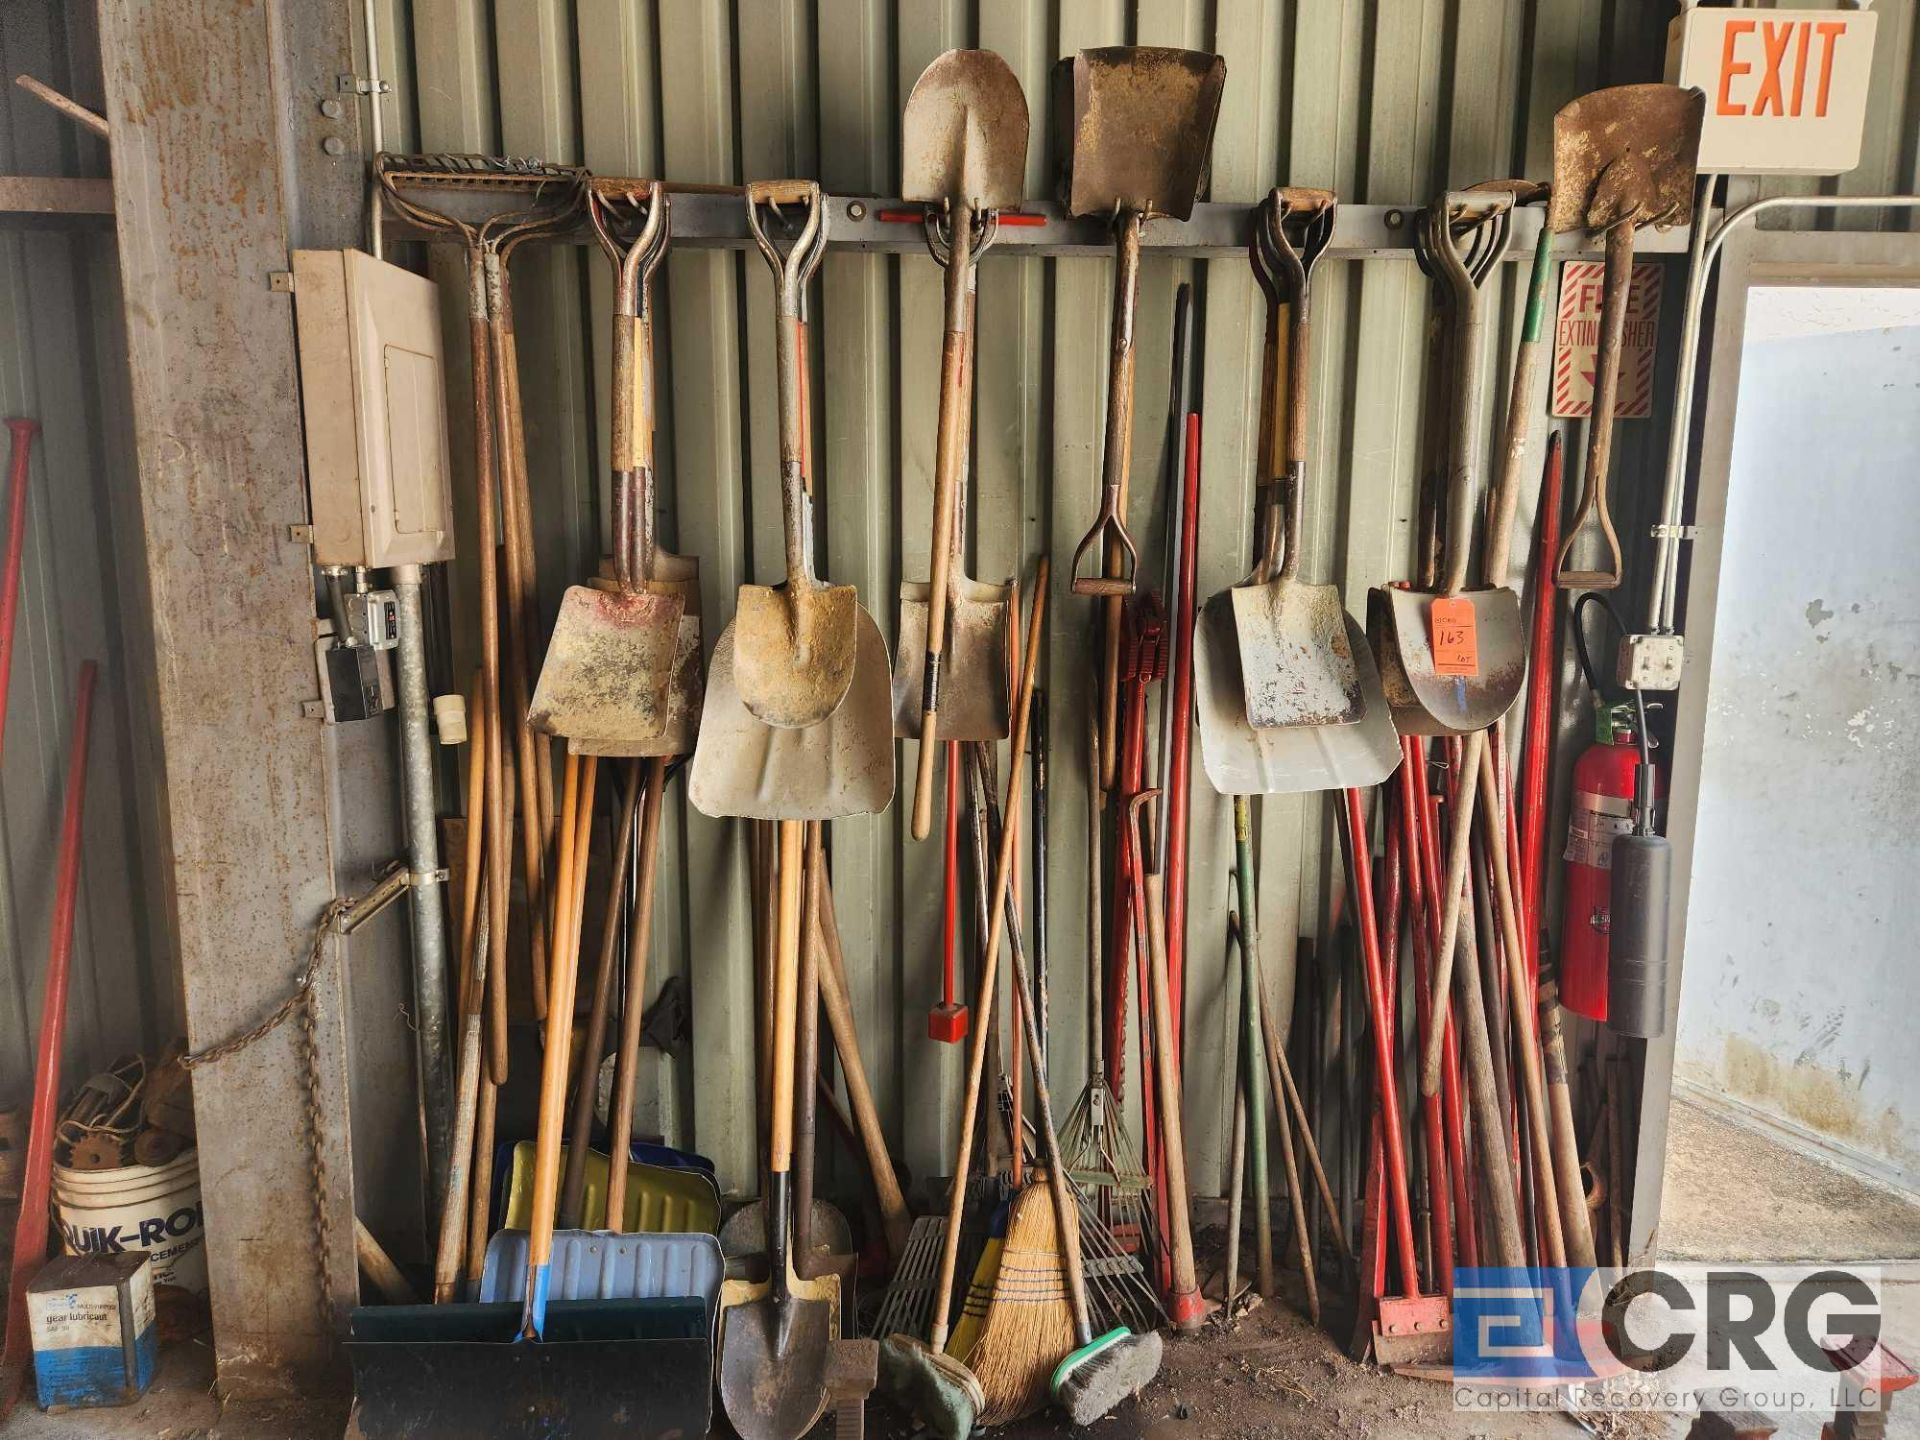 Assorted Landscaping Equipment